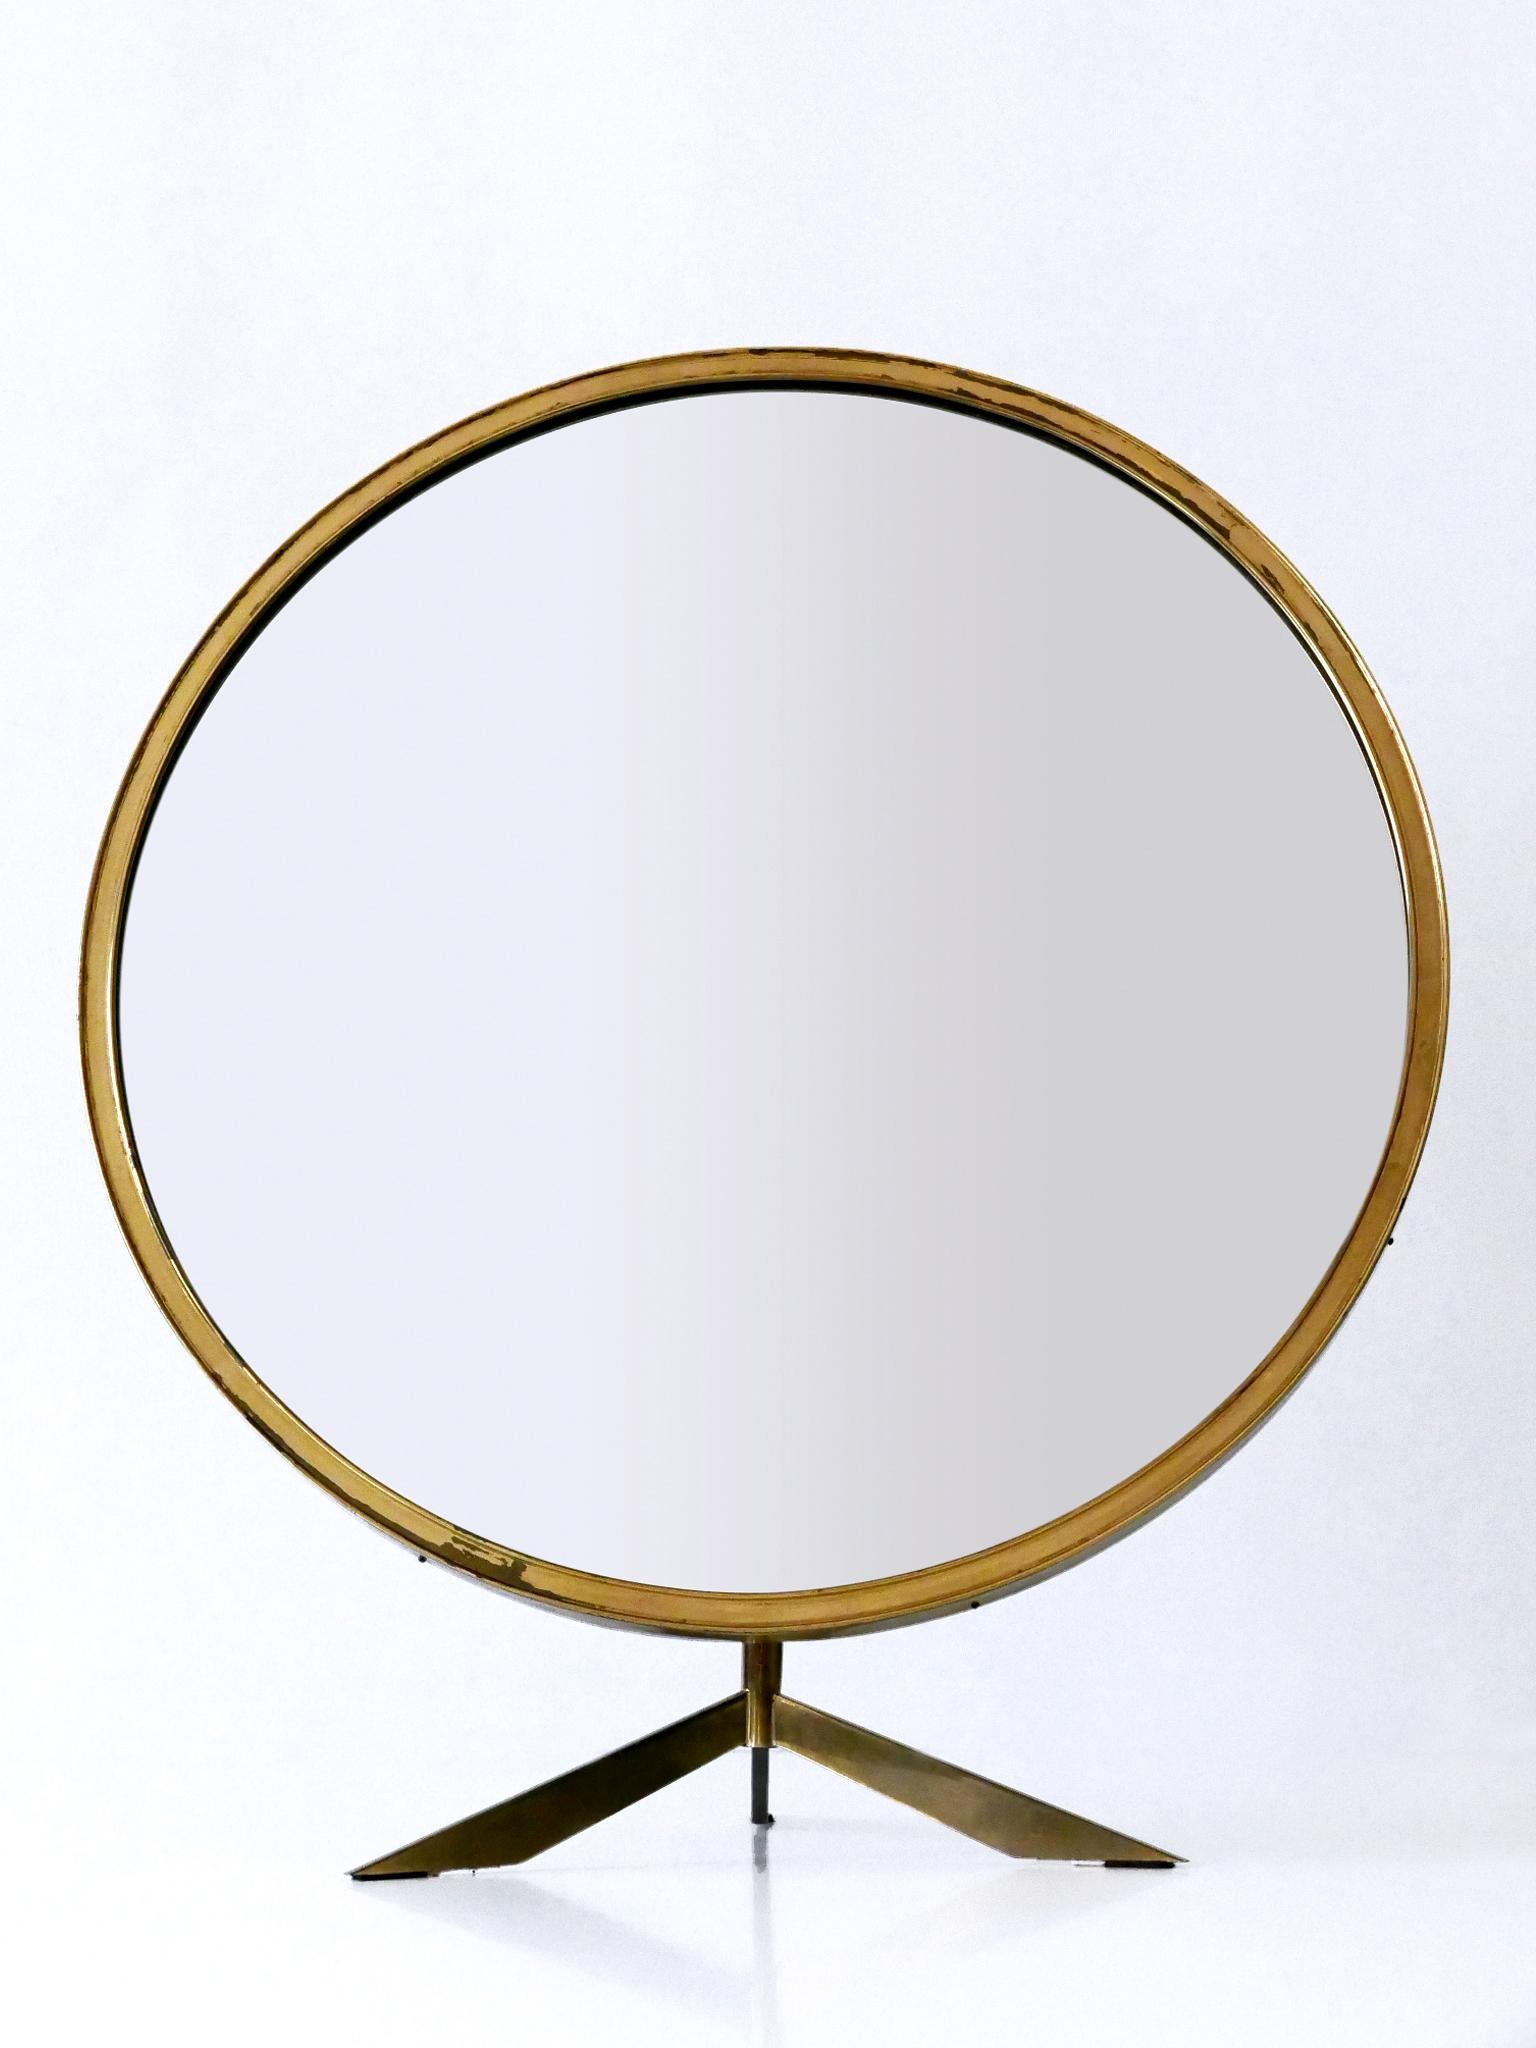 Elegant Mid-Century Modern Wall or Vanity Mirror by Zierform Germany 1950s For Sale 3